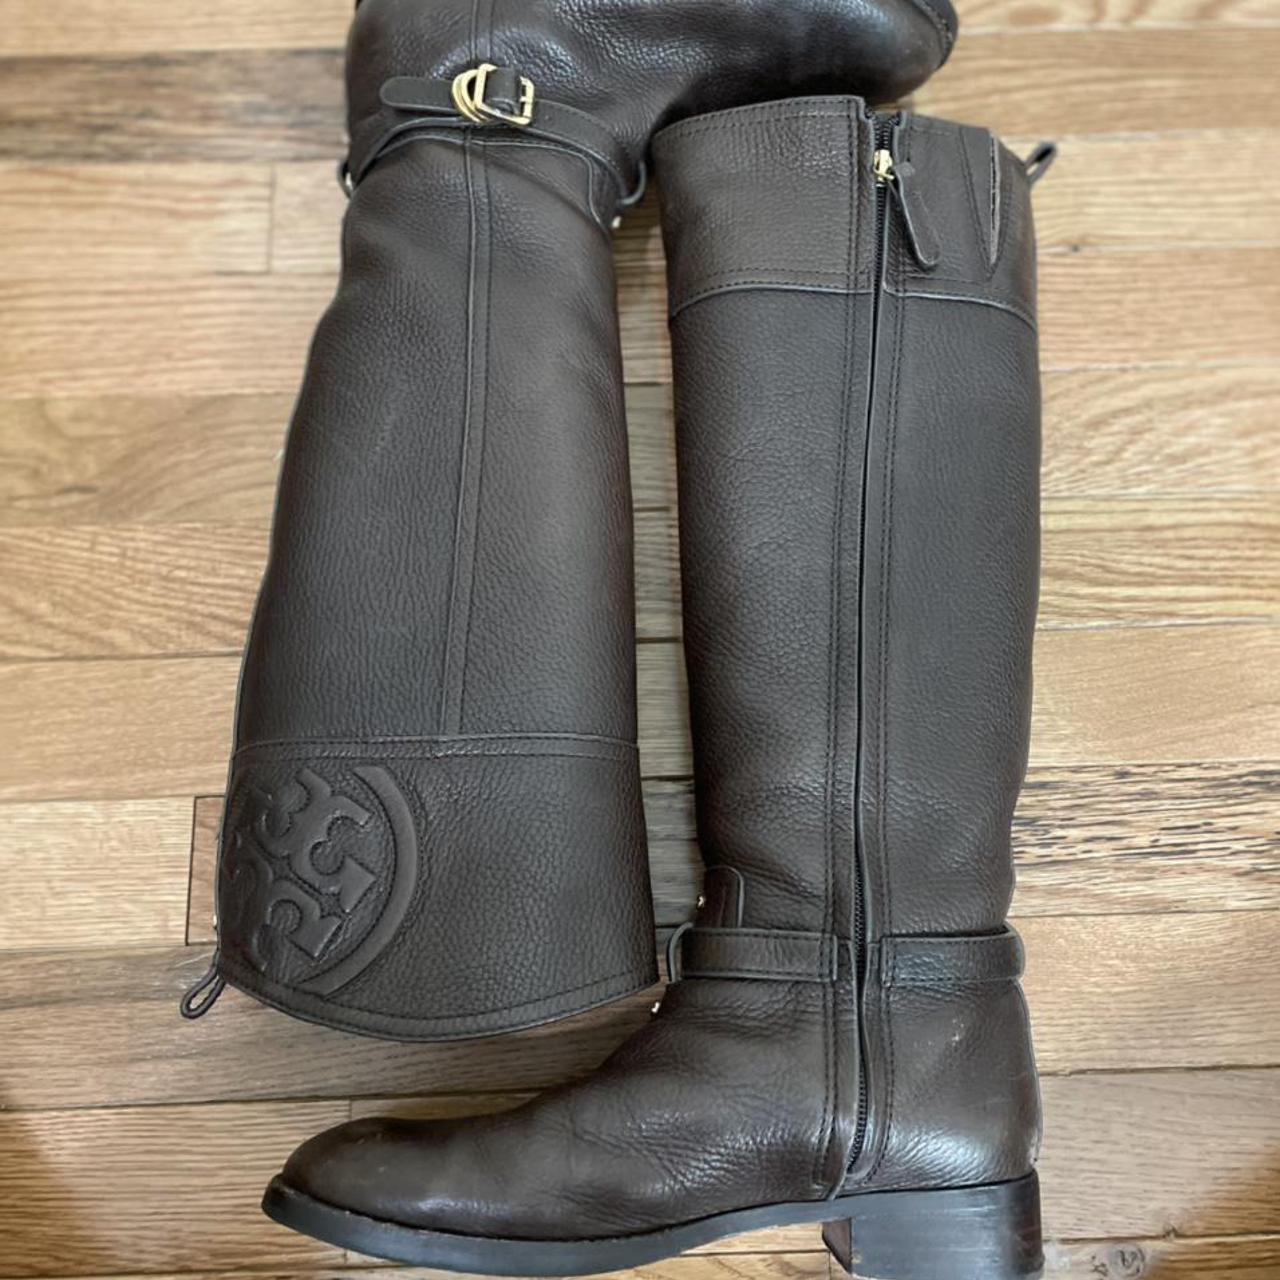 TORY BURCH MARLENE LEATHER RIDING BOOT SIZE